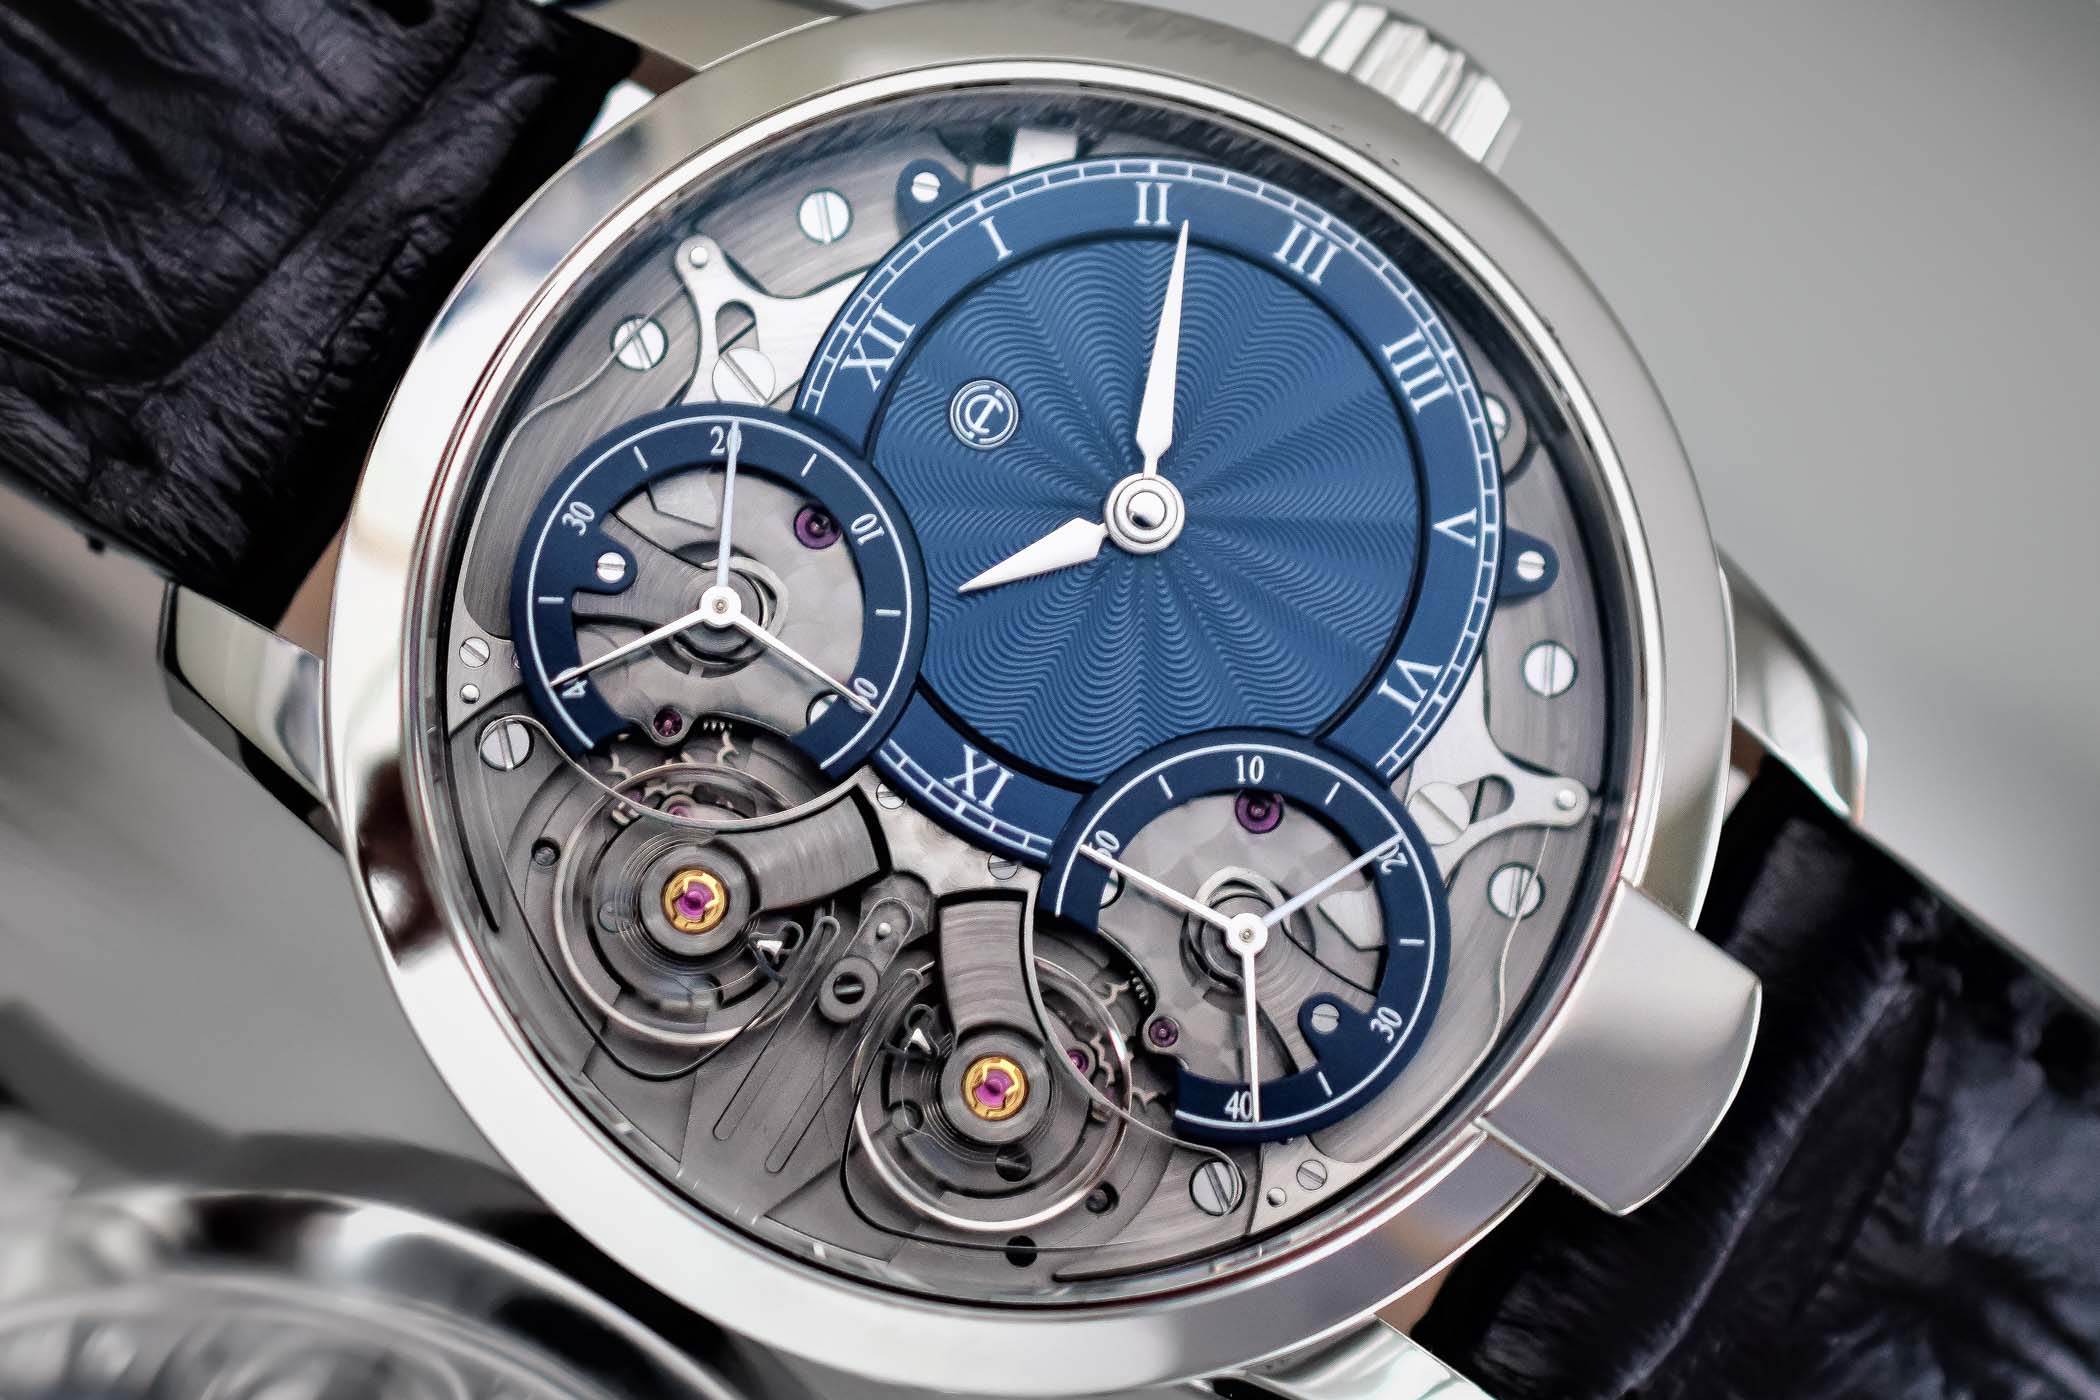 Armin Strom Mirrored Force Resonance Guilloche Dials by Voutilainen